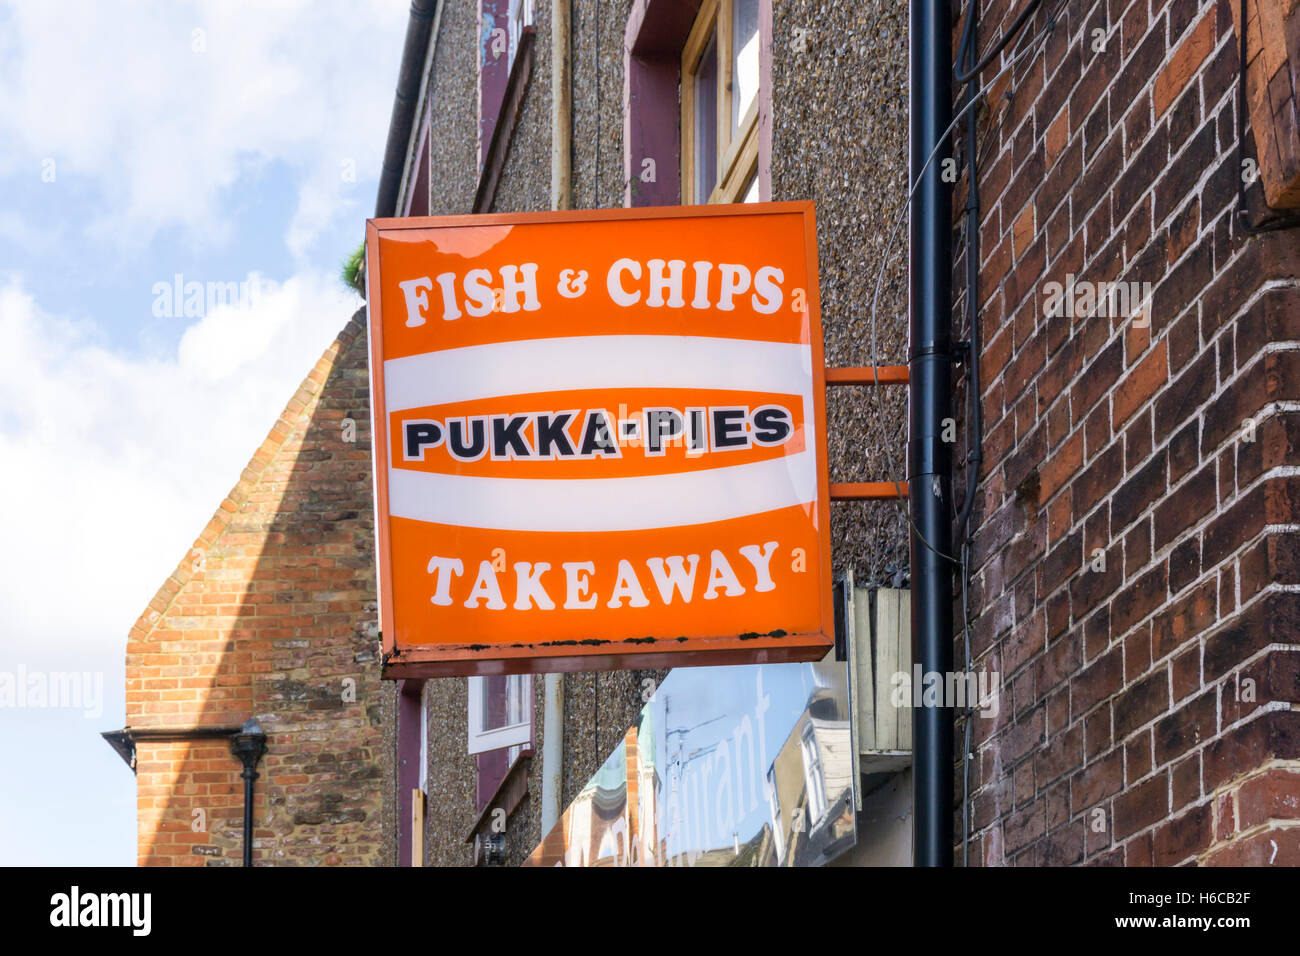 A Pukka-Pies sign outside a fish & chips shop. Stock Photo